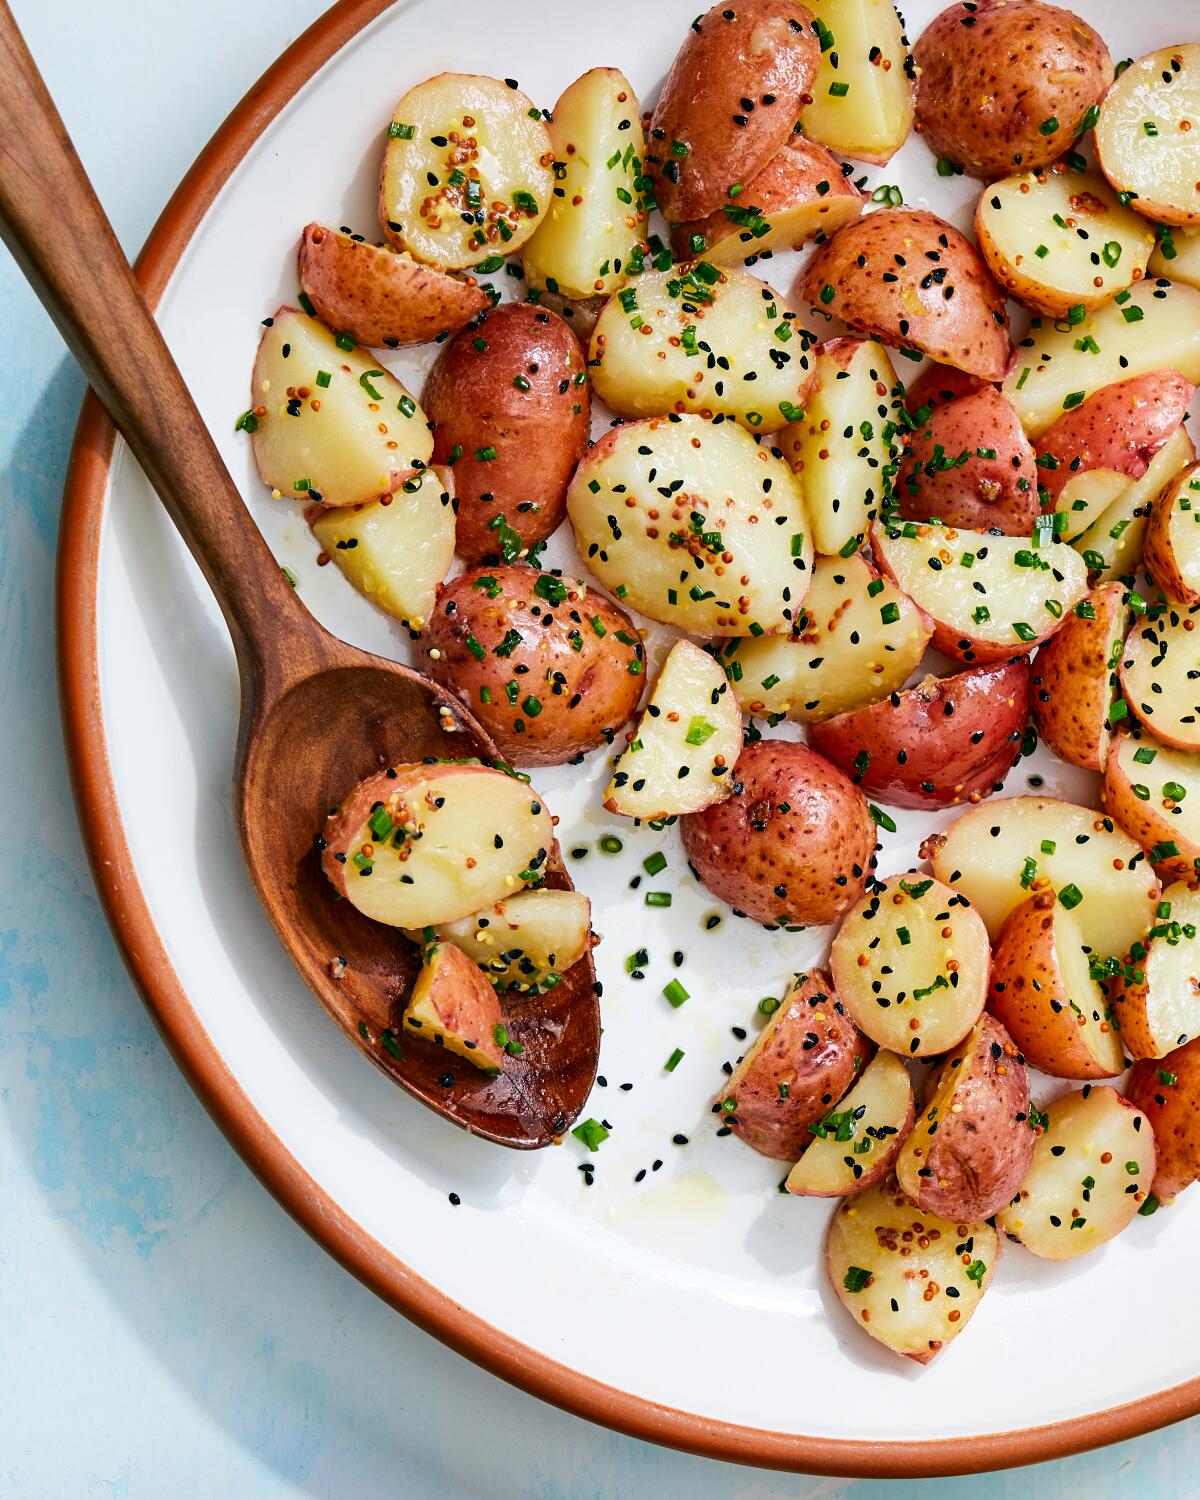 Warm potato salad is satisfying enough to serve as the main meal.